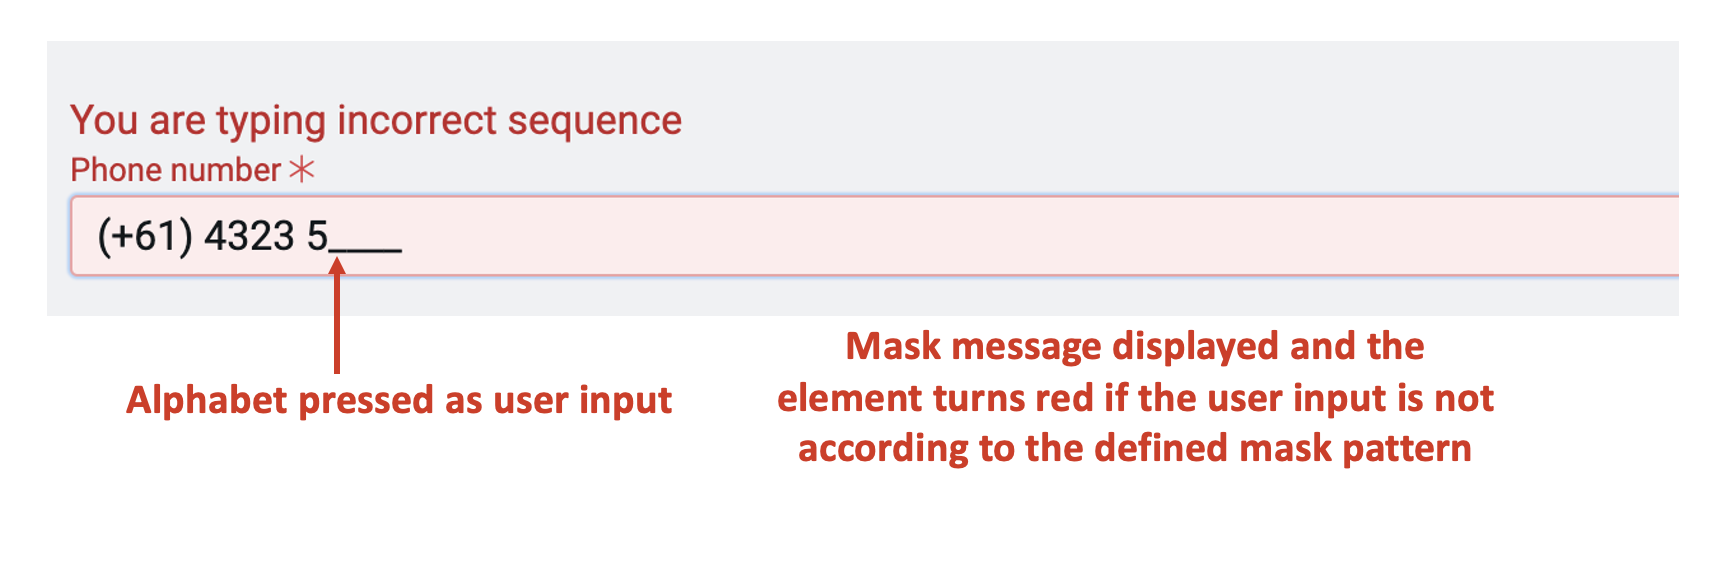 Image showing mask message displayed when user input is inconsistent with mask pattern